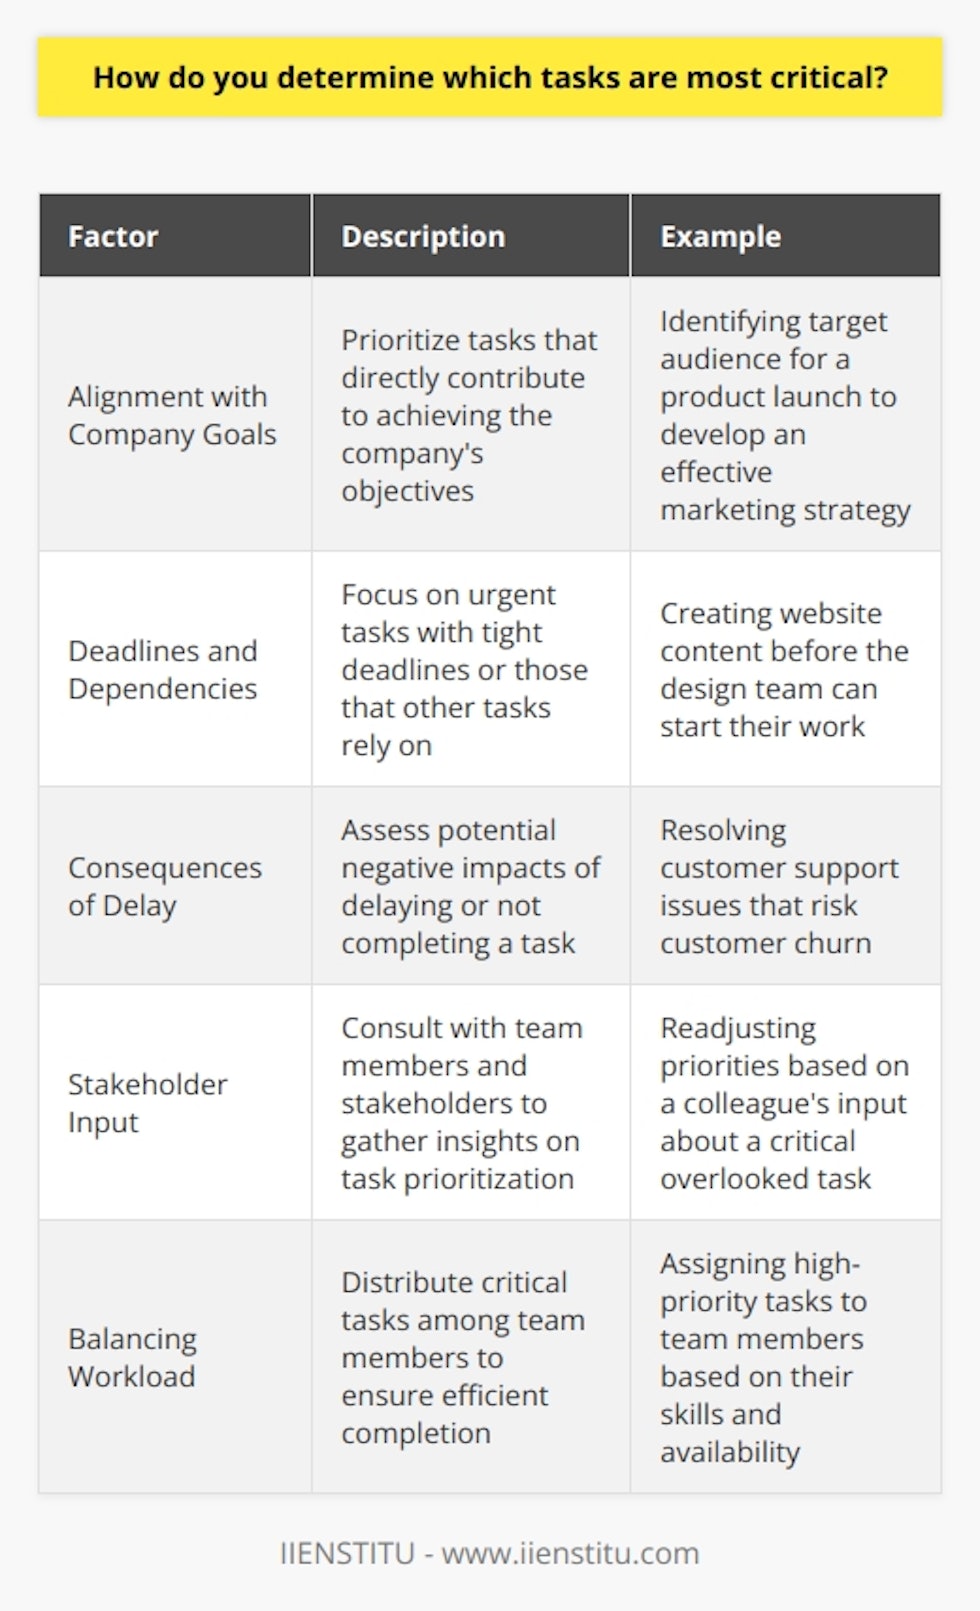 When determining which tasks are most critical, I first consider the impact each task has on the companys goals and objectives. Tasks that directly contribute to achieving these goals take priority. For instance, when I worked on a product launch, identifying the target audience was crucial for developing an effective marketing strategy. Aligning Tasks with Deadlines and Dependencies Next, I look at the deadlines and dependencies associated with each task. Urgent tasks with tight deadlines or those that other tasks depend on become high priority. In my previous role, I had to prioritize creating content for a website before the design team could start their work. Evaluating the Consequences of Delay I also assess the potential consequences of delaying or not completing a task. Tasks that could lead to significant financial losses, damage to the companys reputation, or negatively impact customer satisfaction are deemed critical. When I managed a customer support team, resolving issues that risked customer churn was always a top priority. Consulting with Team Members and Stakeholders Finally, I consult with team members and stakeholders to gather their input on task prioritization. Their insights help me make informed decisions and ensure everyone is aligned on priorities. I remember a project where a colleague pointed out a critical task I had initially overlooked, which helped me readjust my priorities accordingly. In summary, I determine the most critical tasks by considering their impact, deadlines, dependencies, consequences, and stakeholder input. This approach helps me focus on what matters most and deliver the best results for the company.